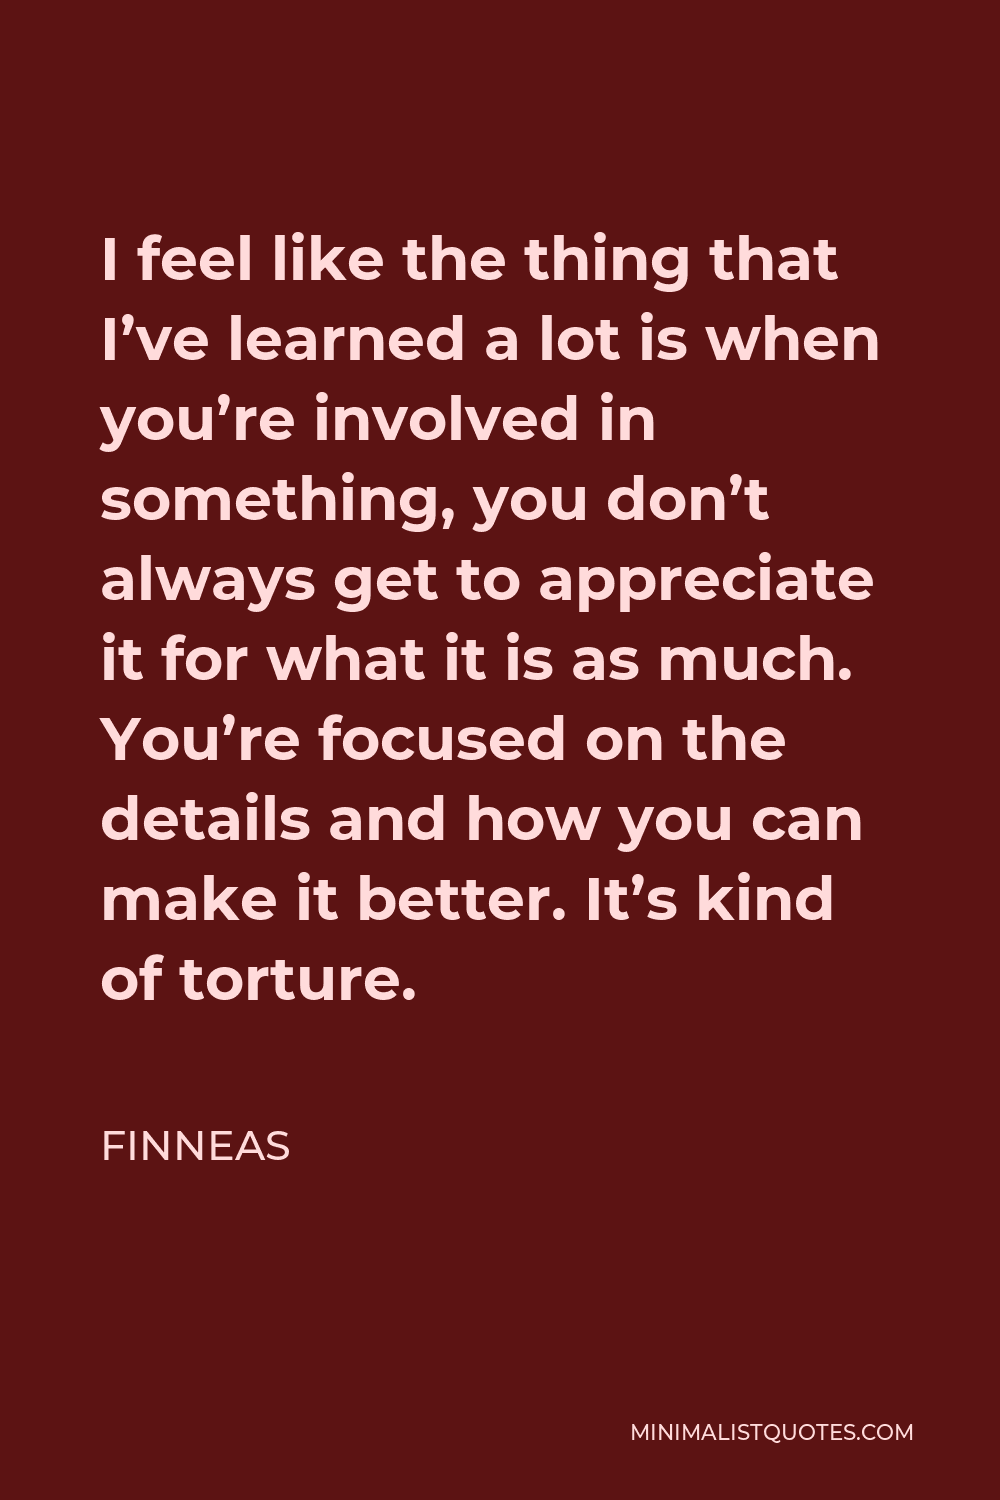 Finneas Quote - I feel like the thing that I’ve learned a lot is when you’re involved in something, you don’t always get to appreciate it for what it is as much. You’re focused on the details and how you can make it better. It’s kind of torture.